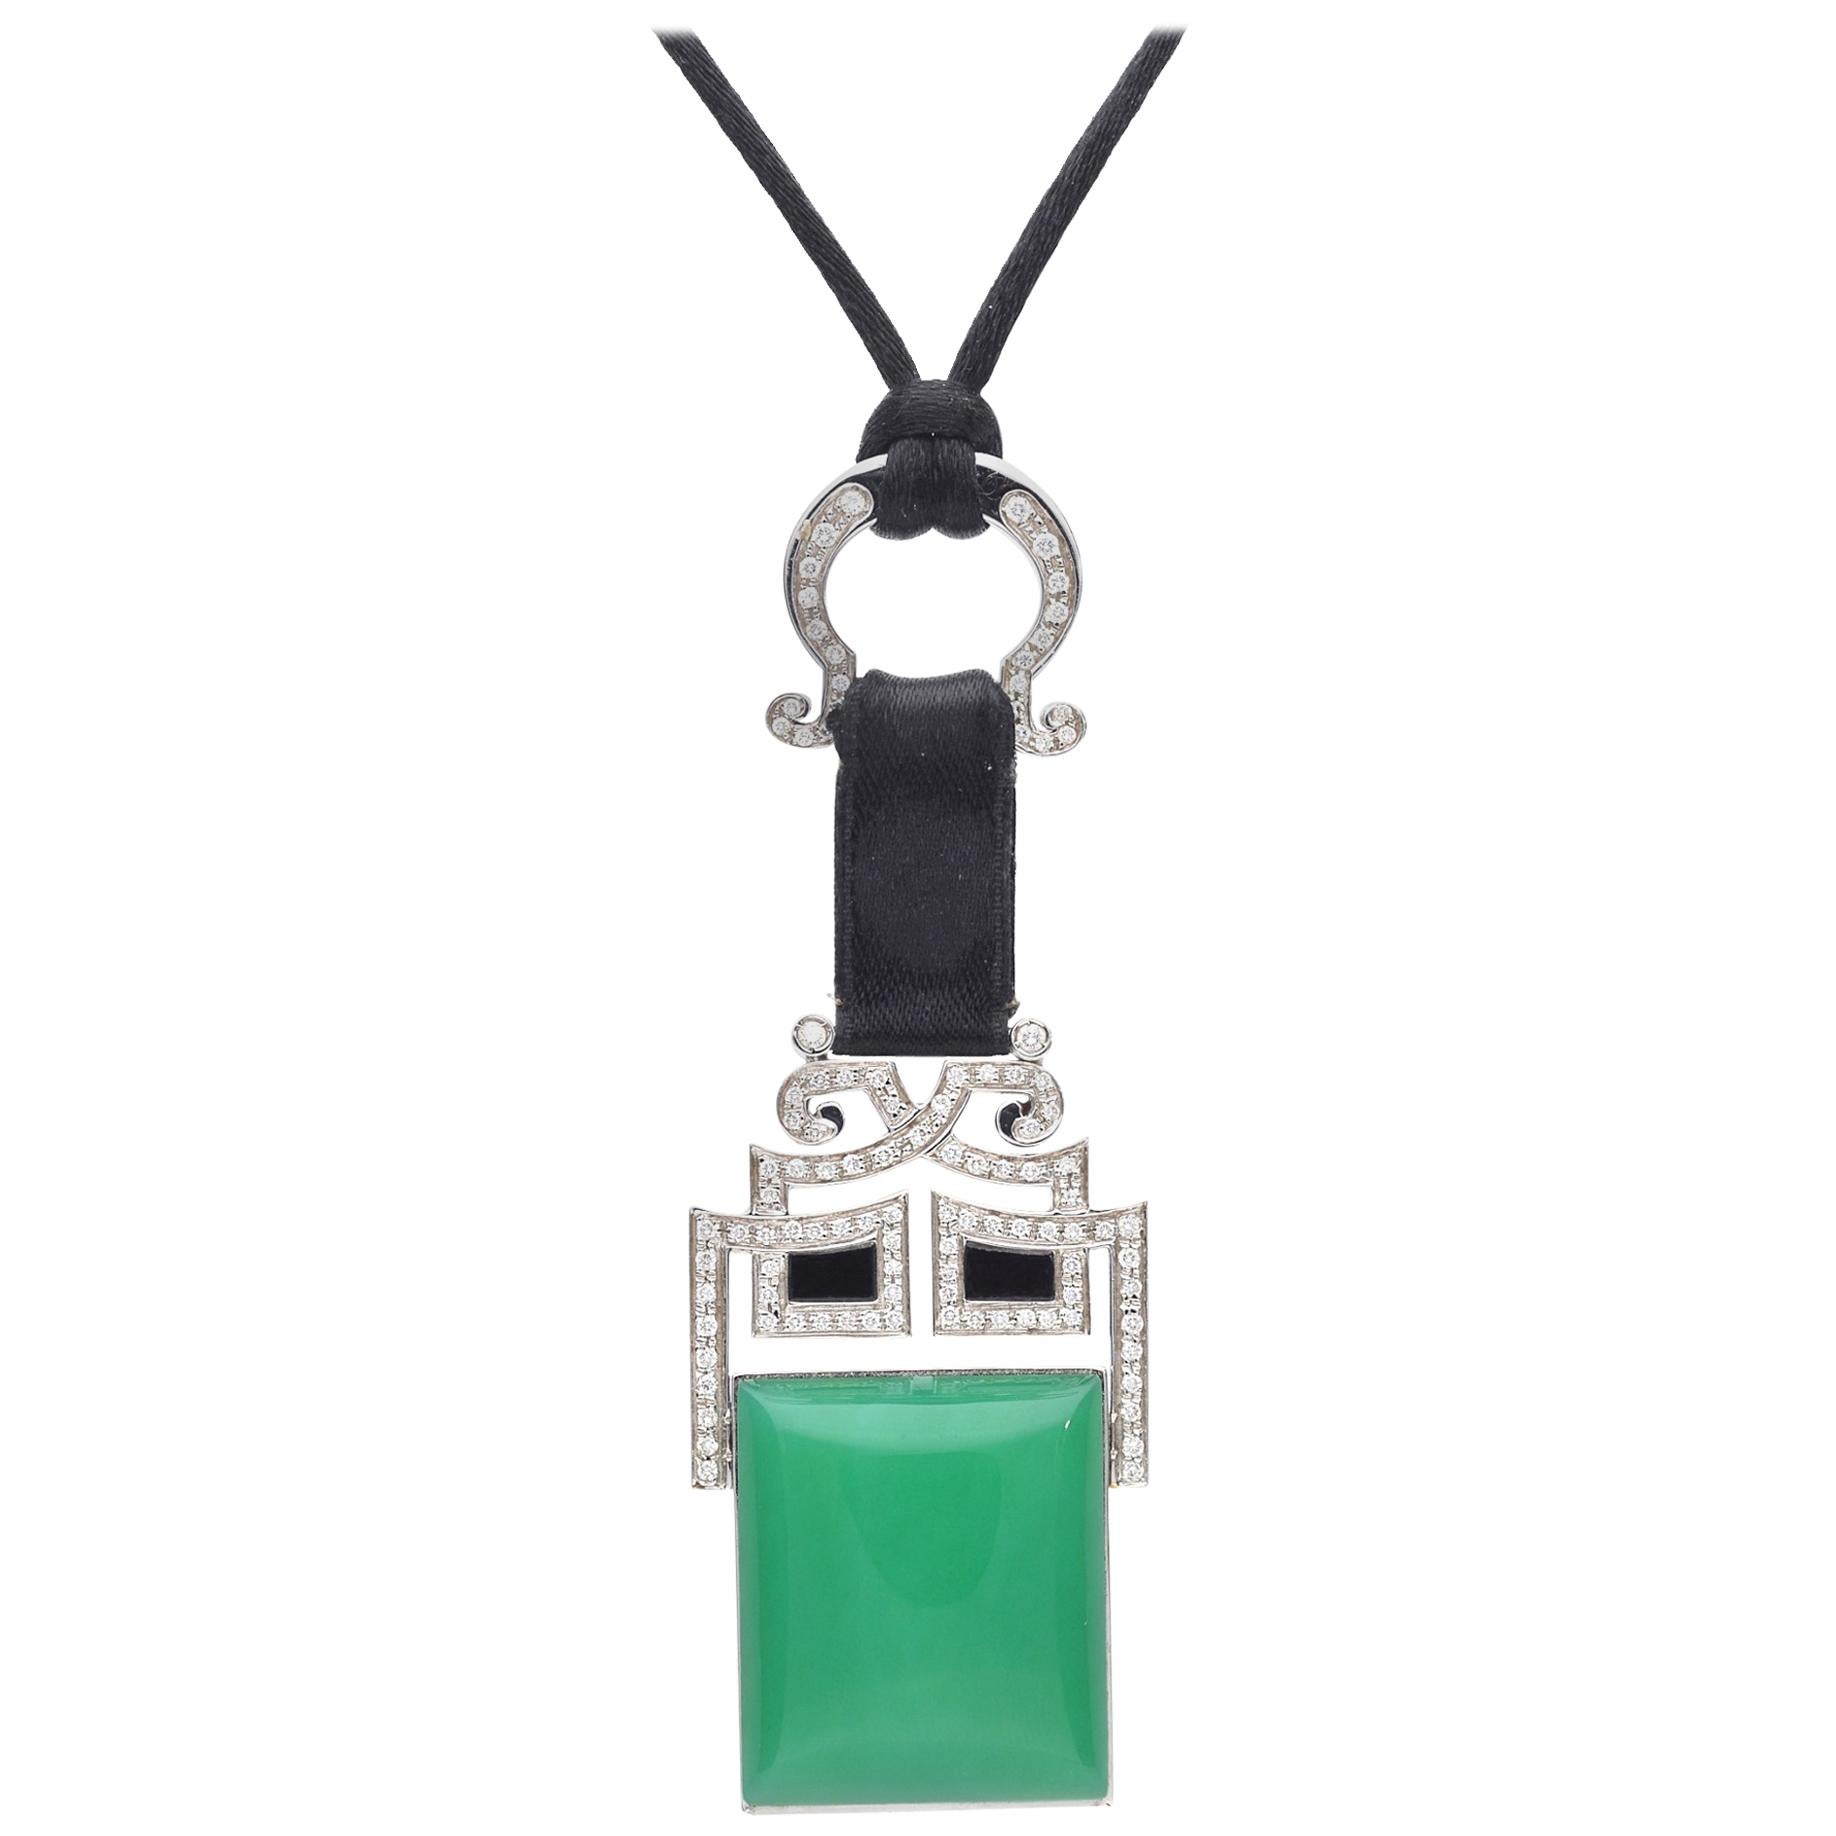 Art Deco Style Pendant Necklace with Chrysophase, Diamonds and Onyx.